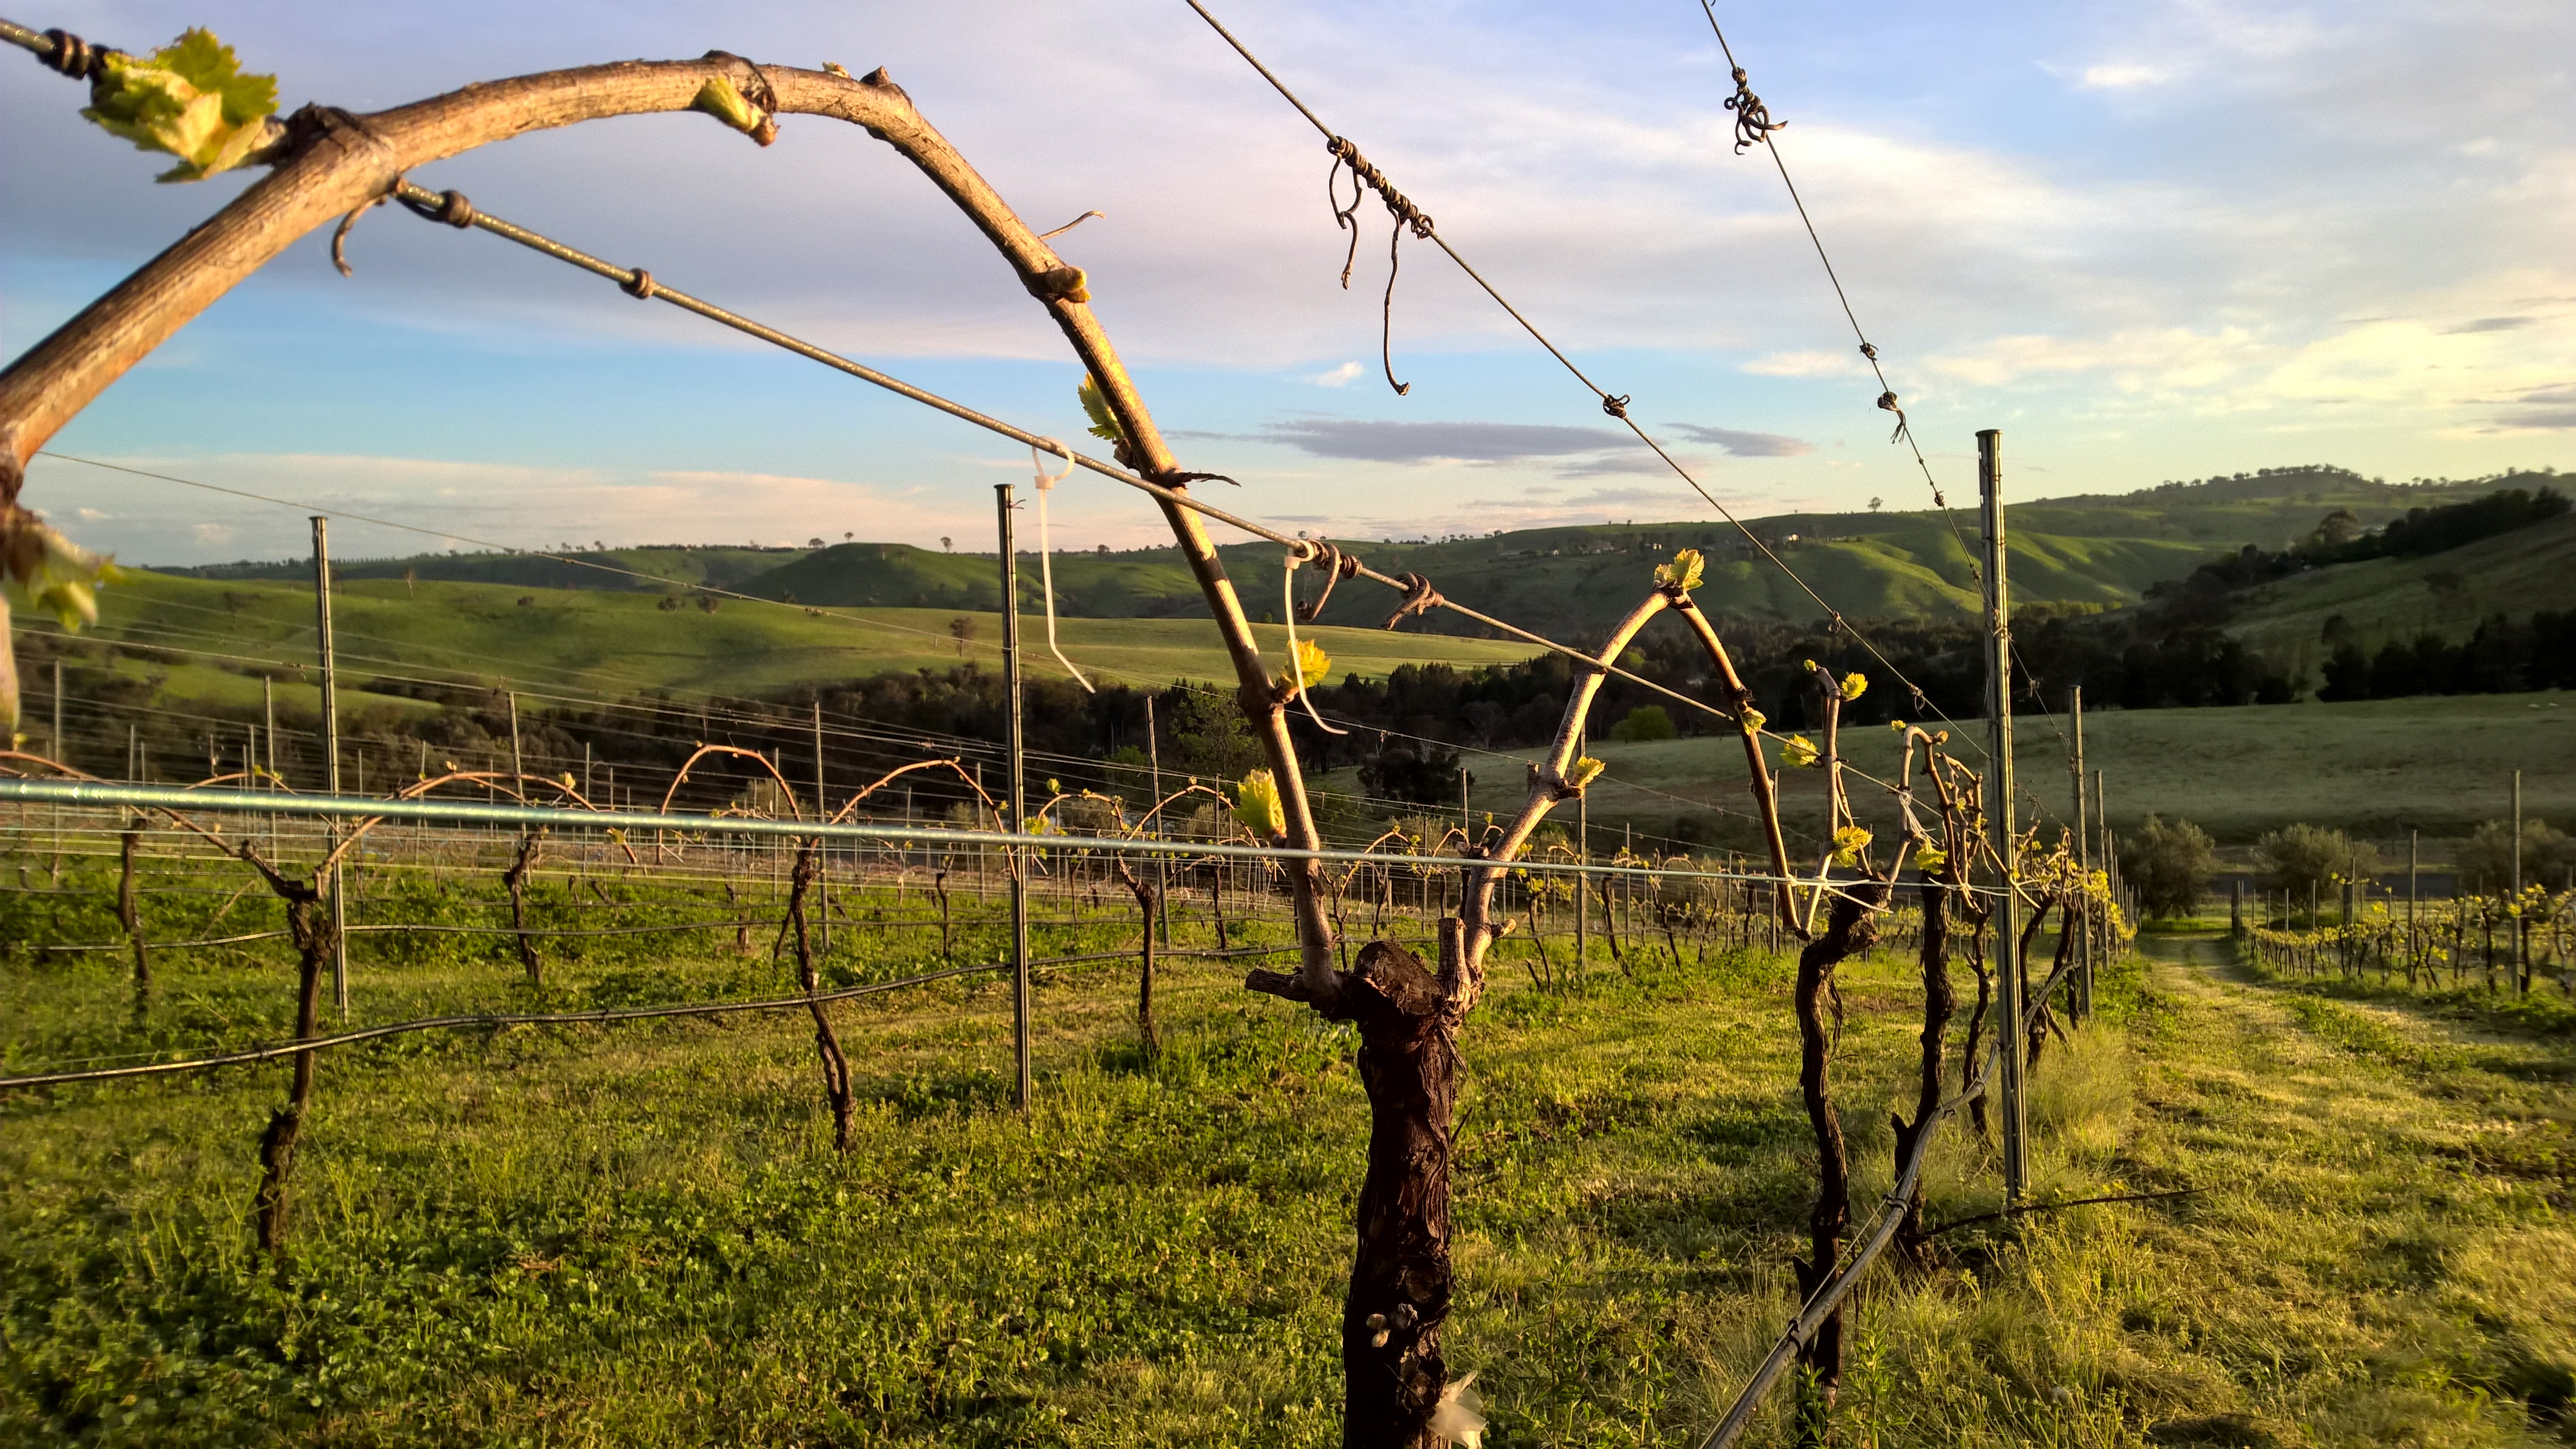 Arched canes on a sangiovese vine.